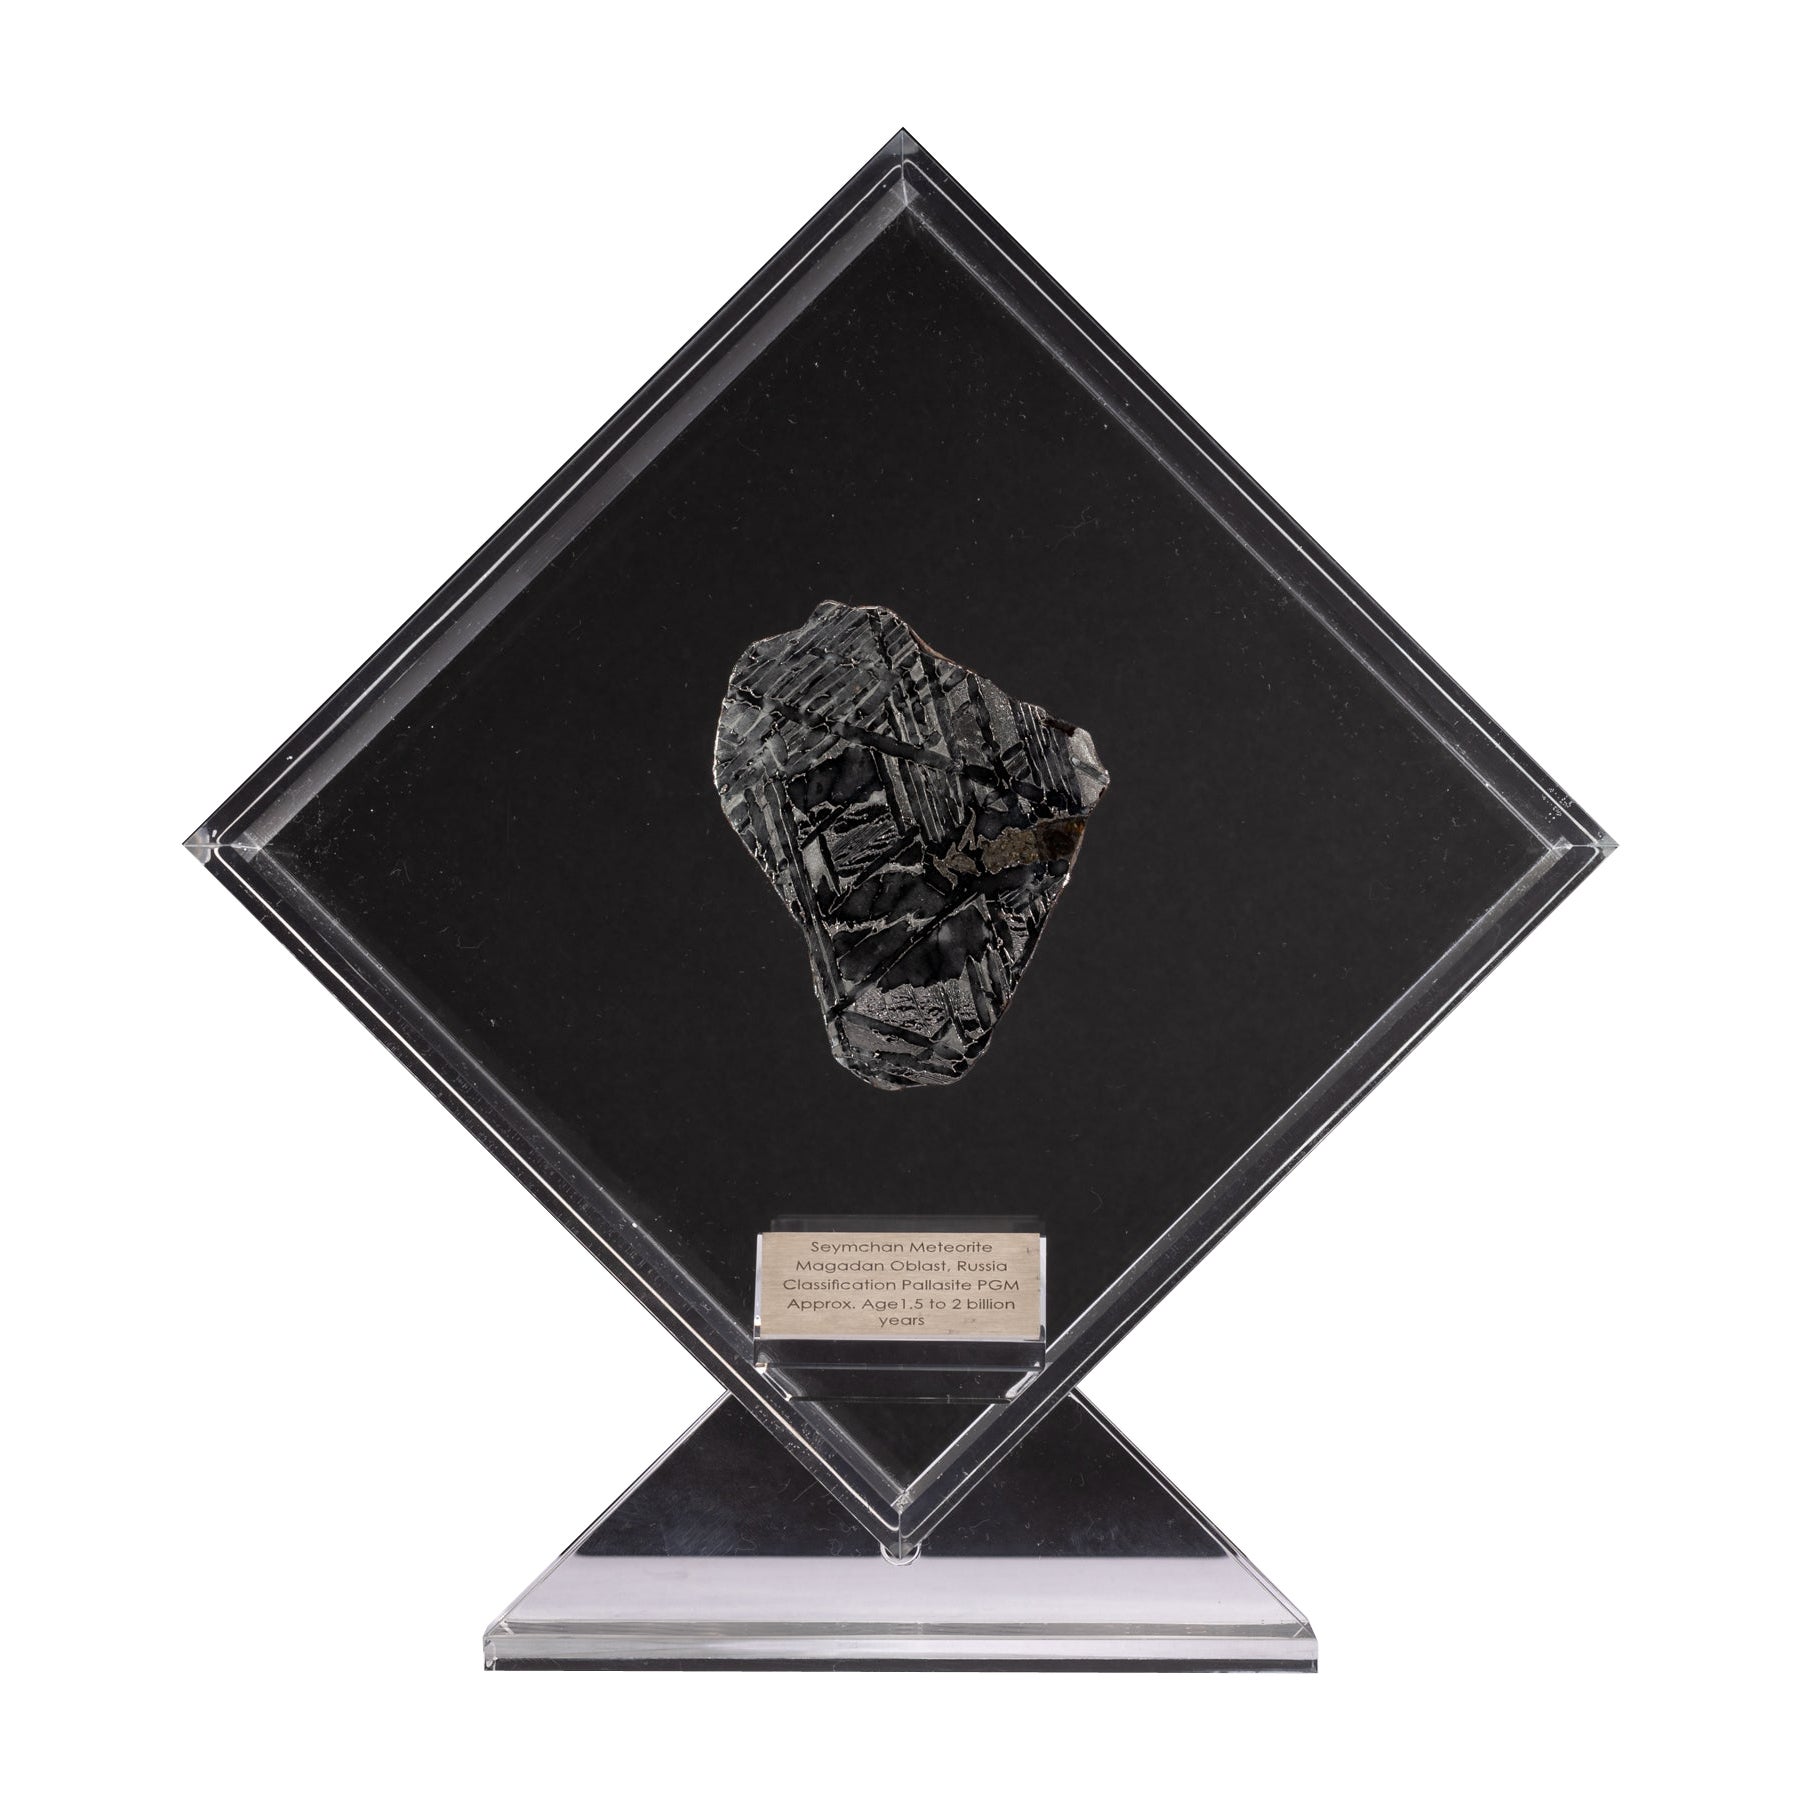 Original Design, Seymchan with Olivine Meteorite in a Clear Acrylic Display For Sale